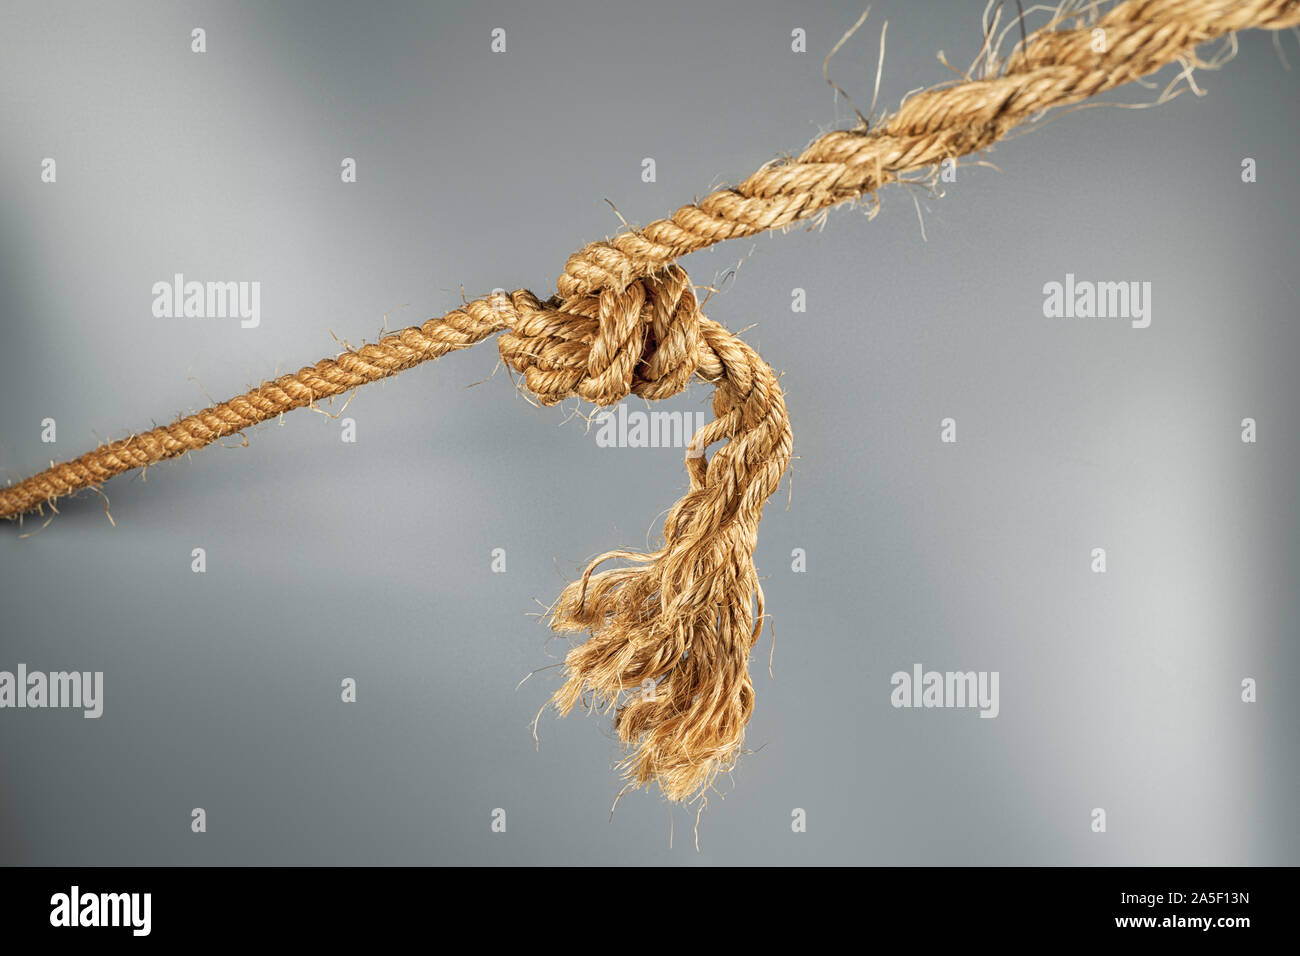 https://c8.alamy.com/comp/2A5F13N/rough-strong-ropes-connected-by-large-knot-on-gray-background-selective-focus-2A5F13N.jpg